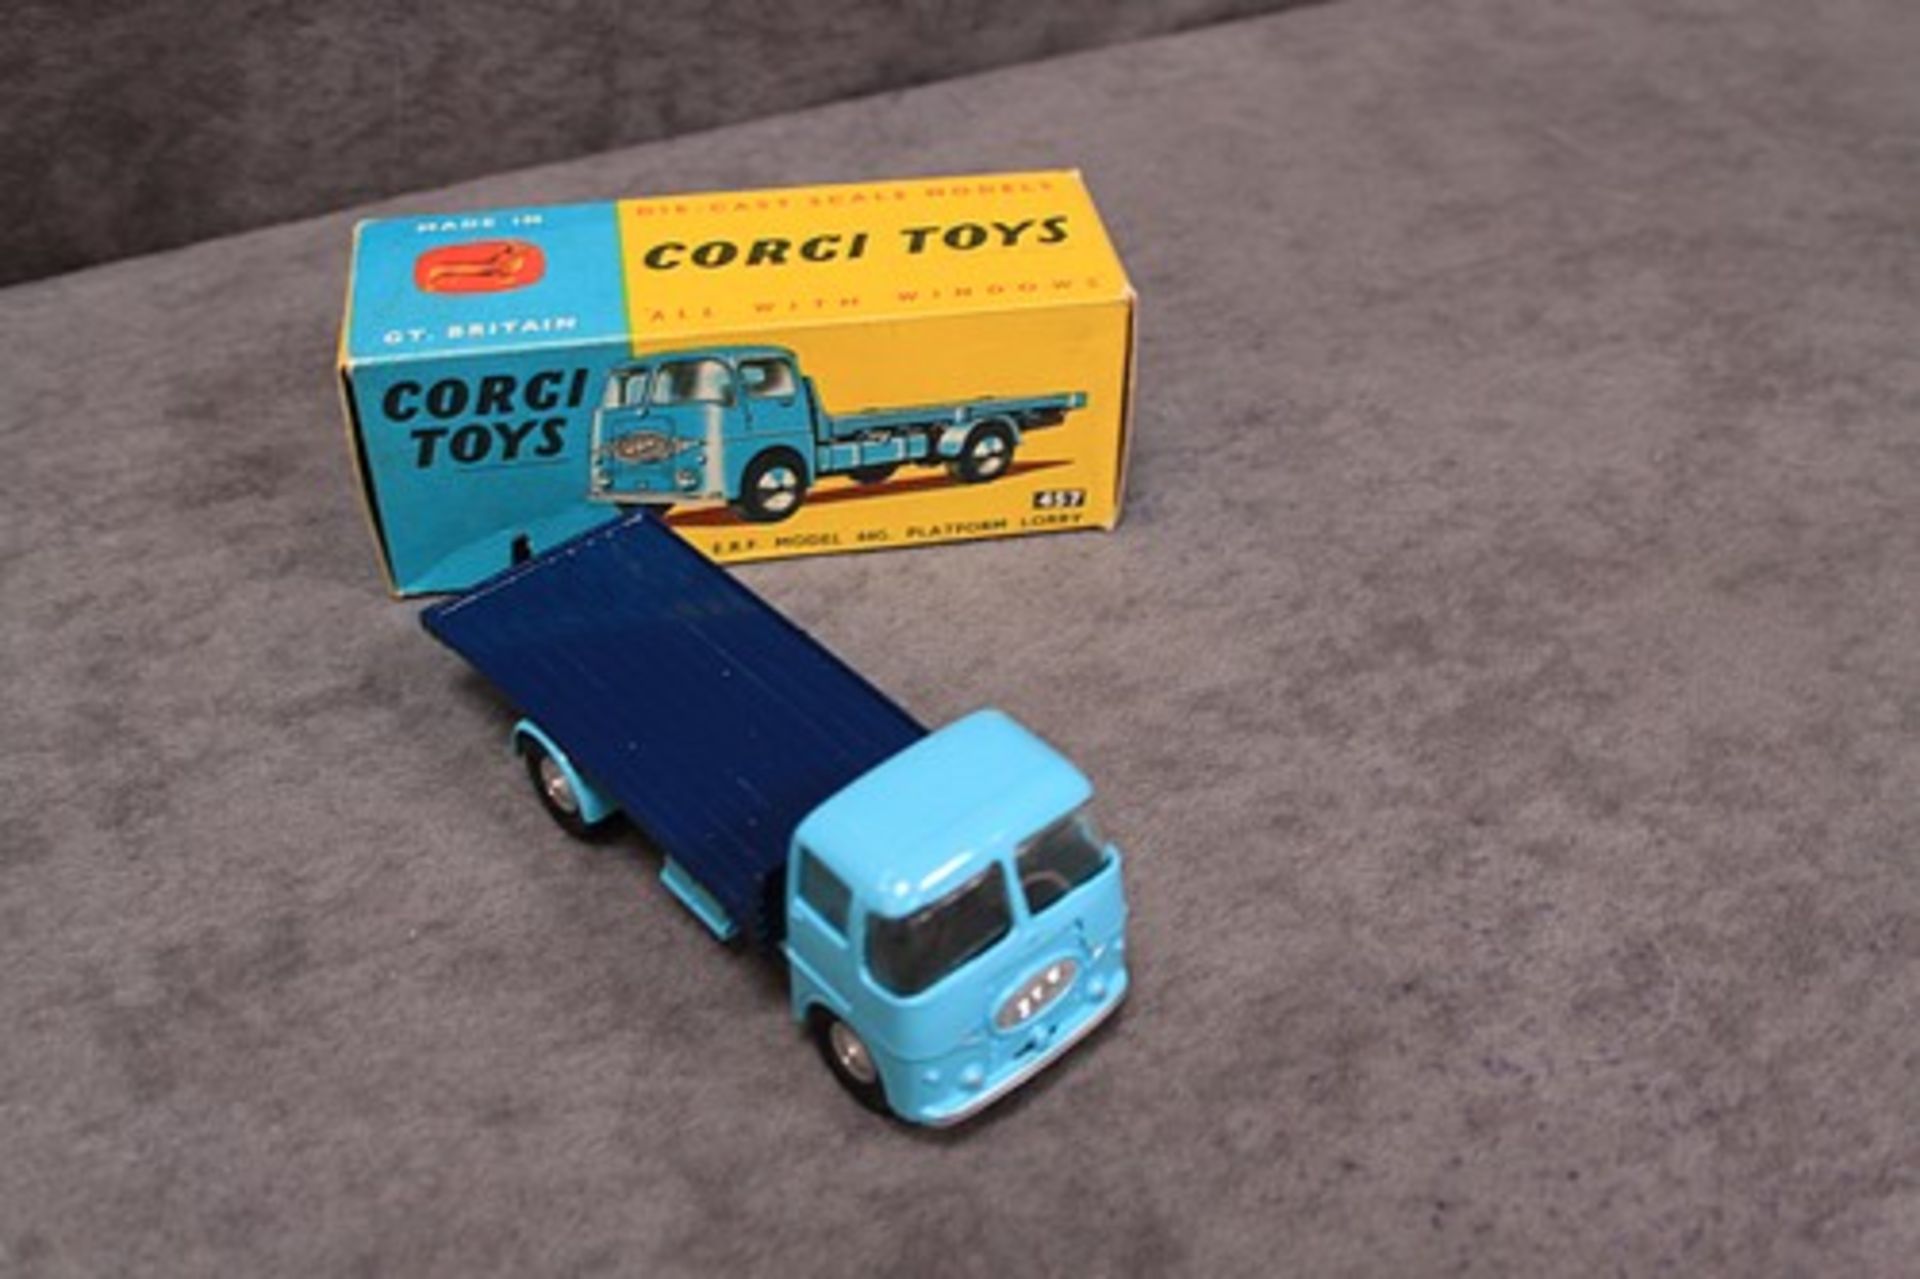 Mint Corgi Toys Diecast #457 ERF model 44G Platform Lorry in a firm excellent box - Image 2 of 2